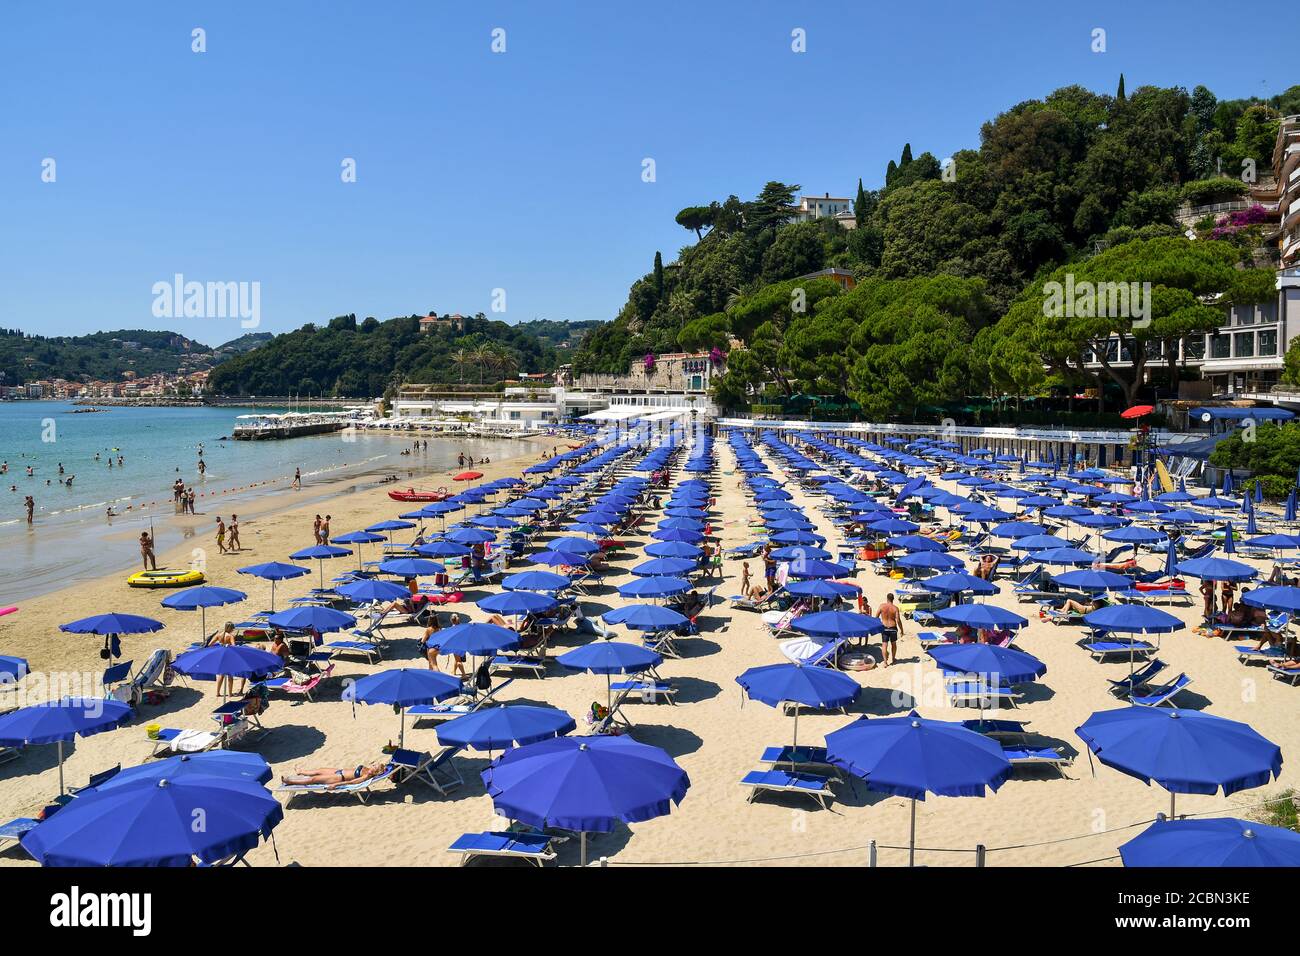 Elevated view of a sandy beach with rows of sun umbrellas, people swimming and sunbathing and the coast in the background, Lerici, La Spezia, Italy Stock Photo